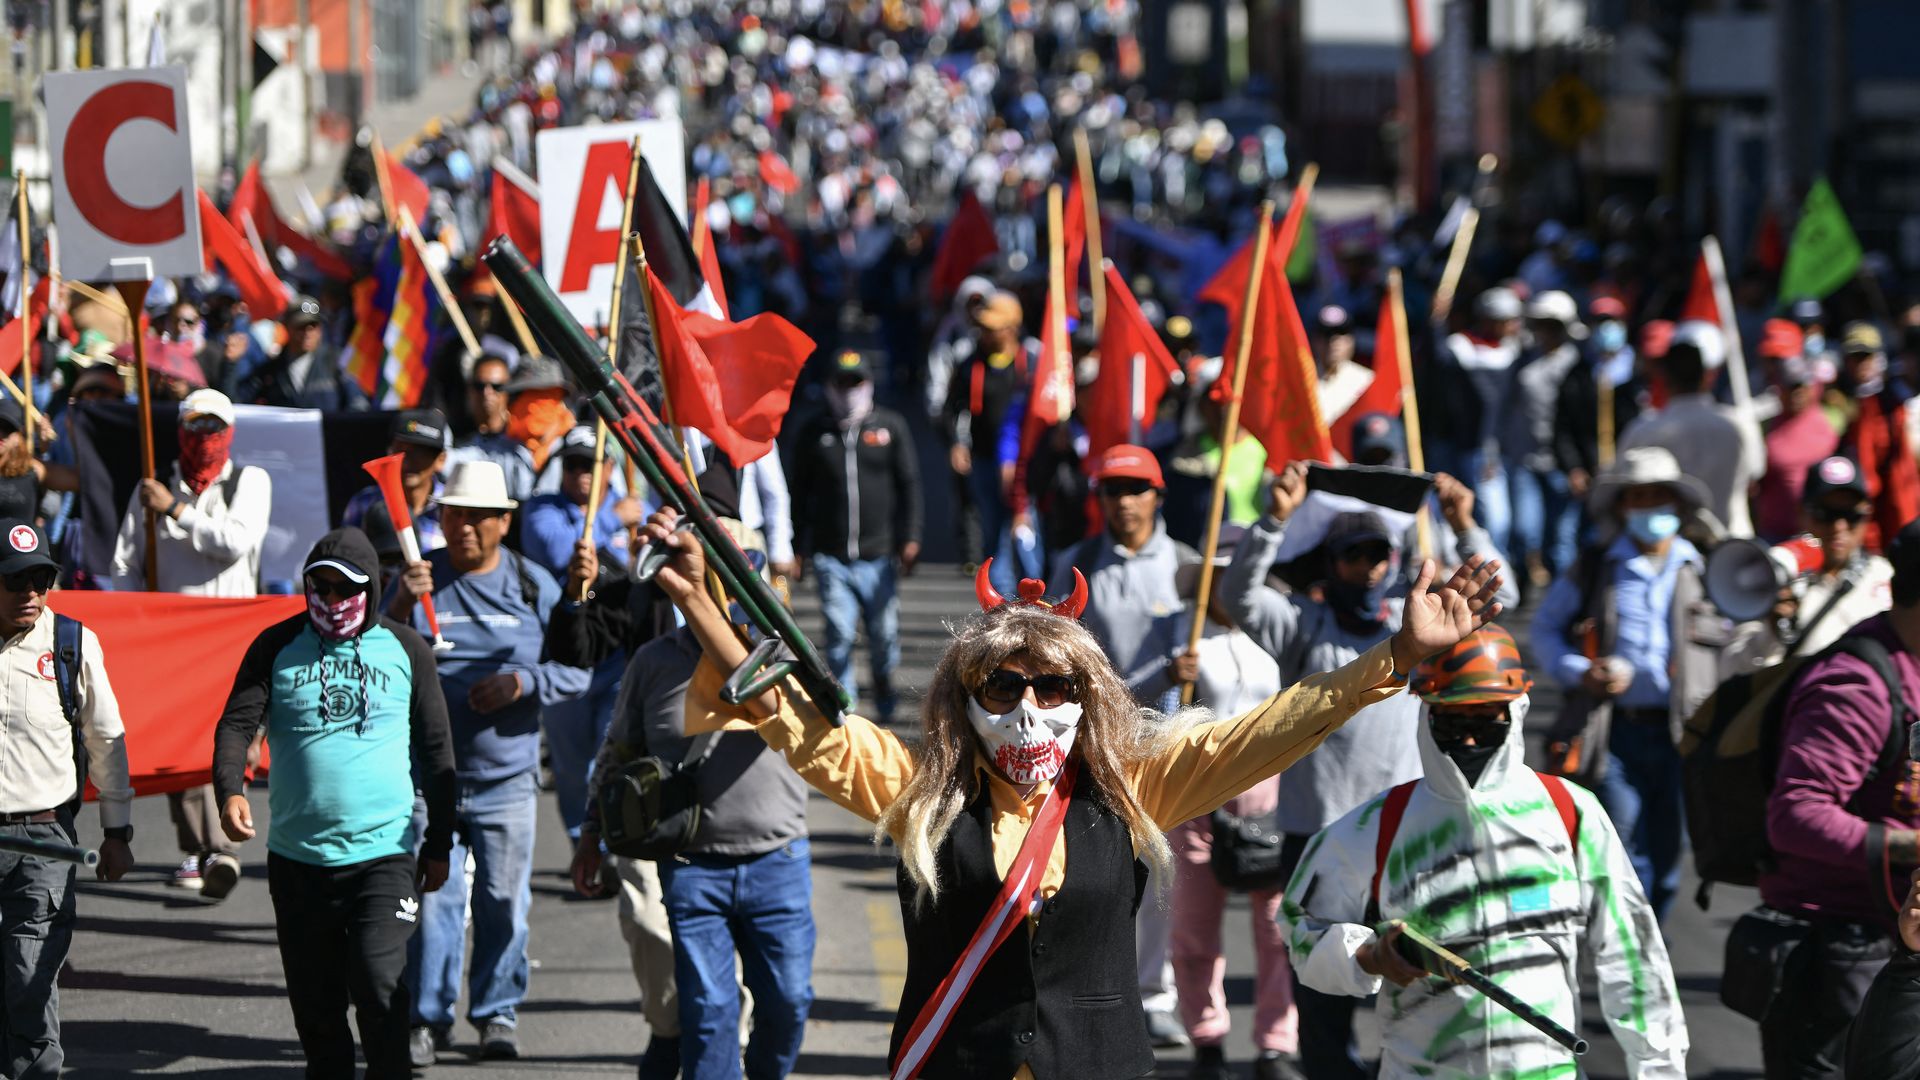 Dozens of proteters walk in the sun in Peru. One person at the front is wearing a blond wig, mask and holding up an object